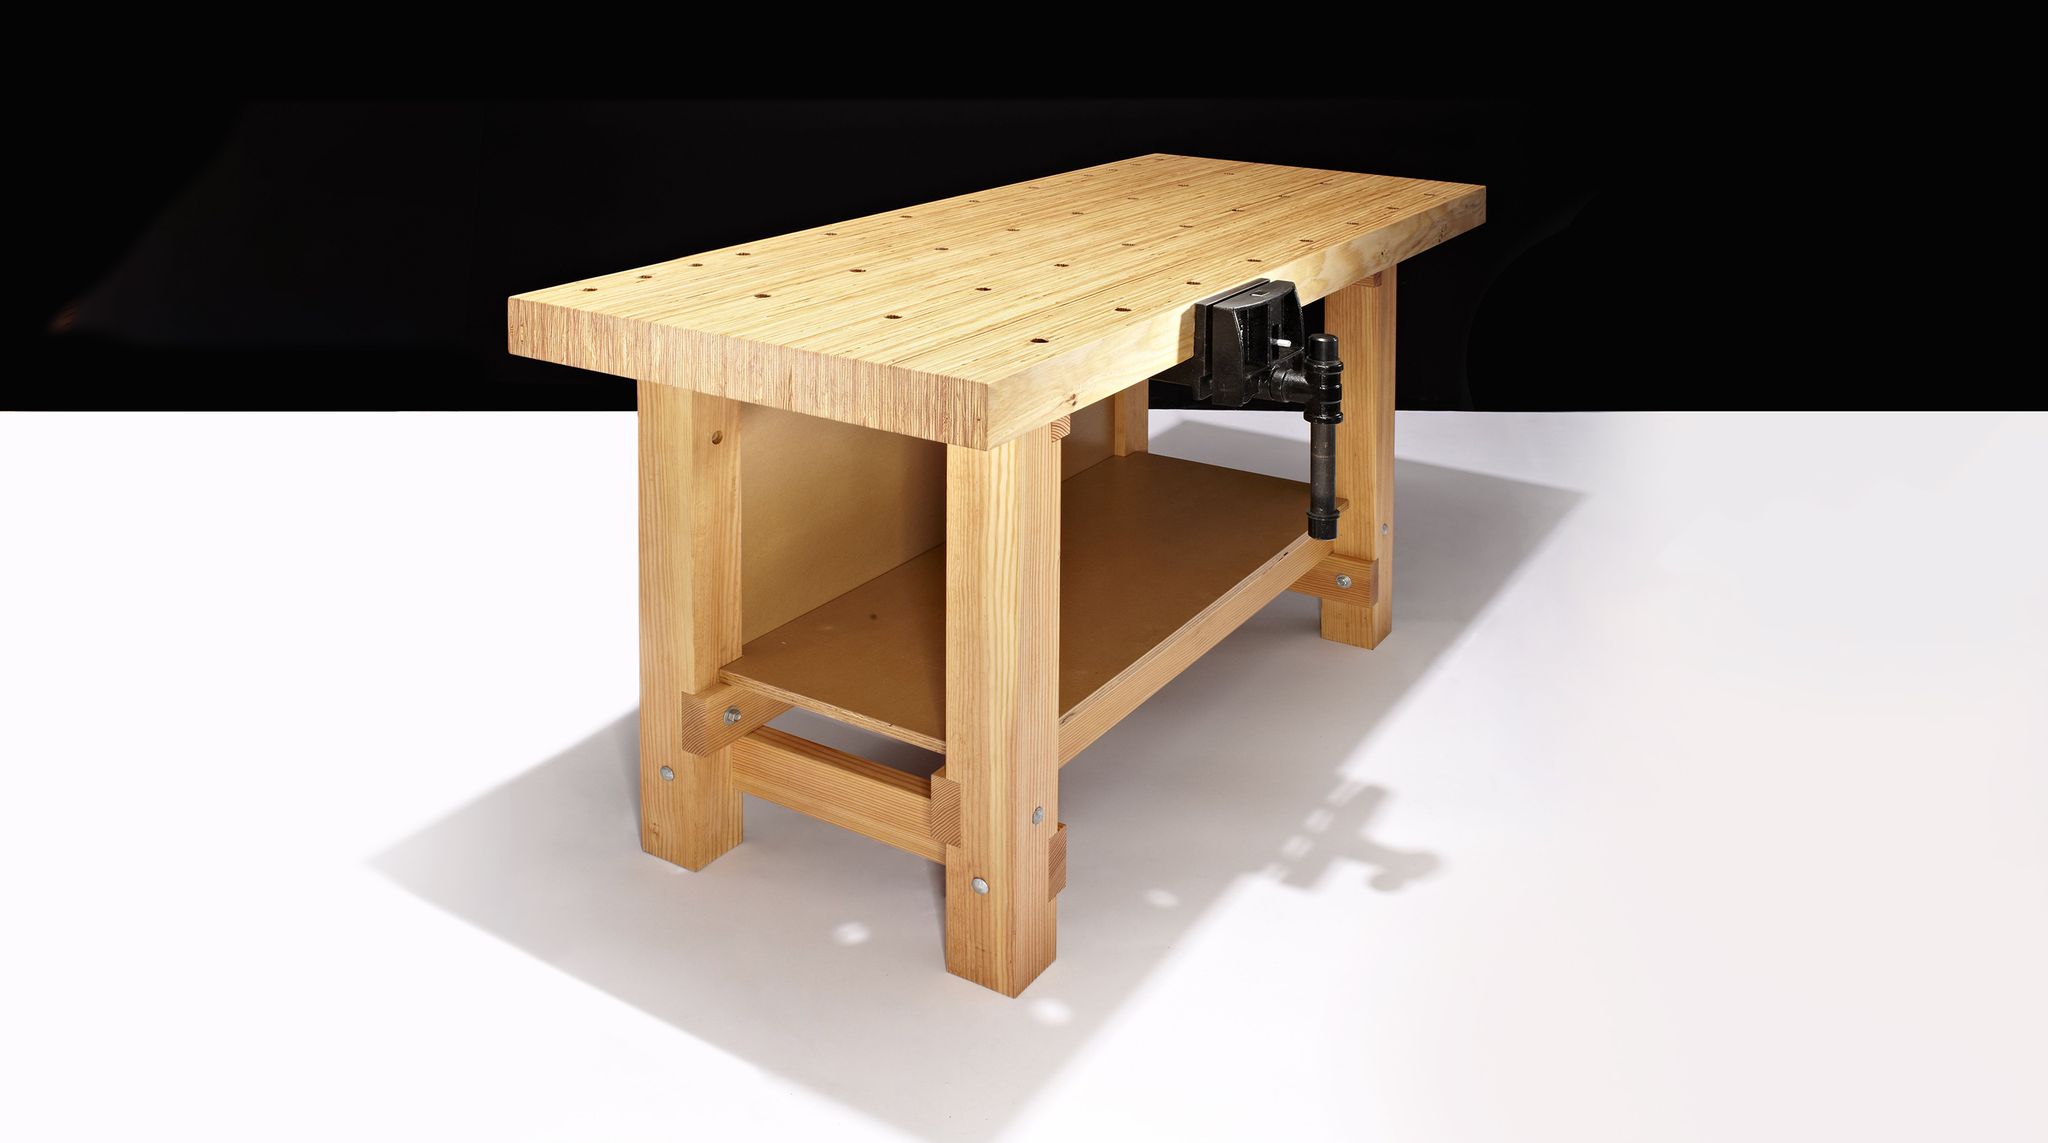 Building A Workbench? Learn The Best Way To Approach Your Build.